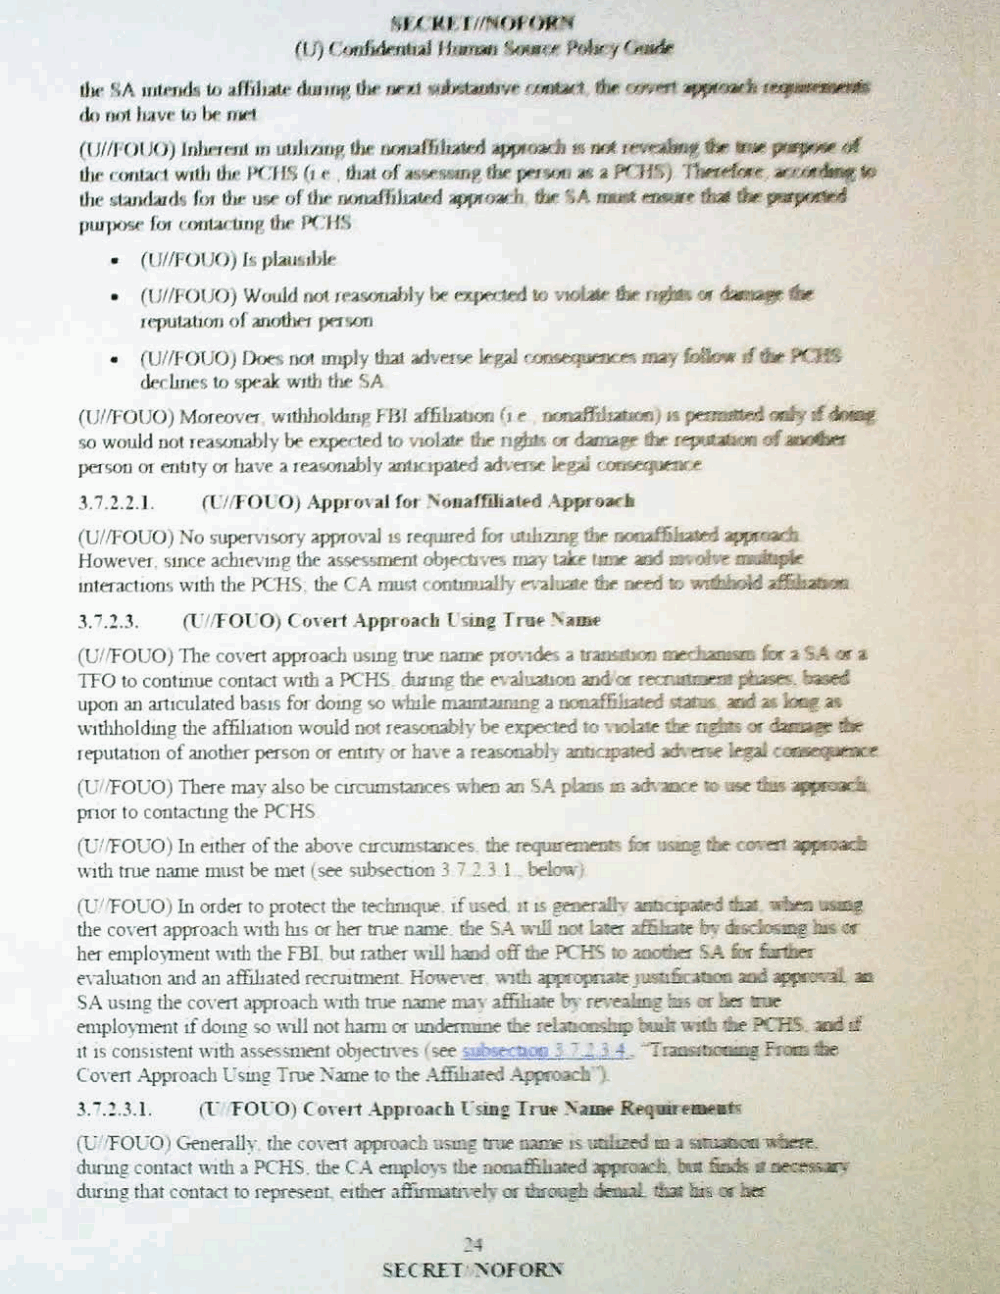 Page 36 from Confidential Human Source Policy Guide